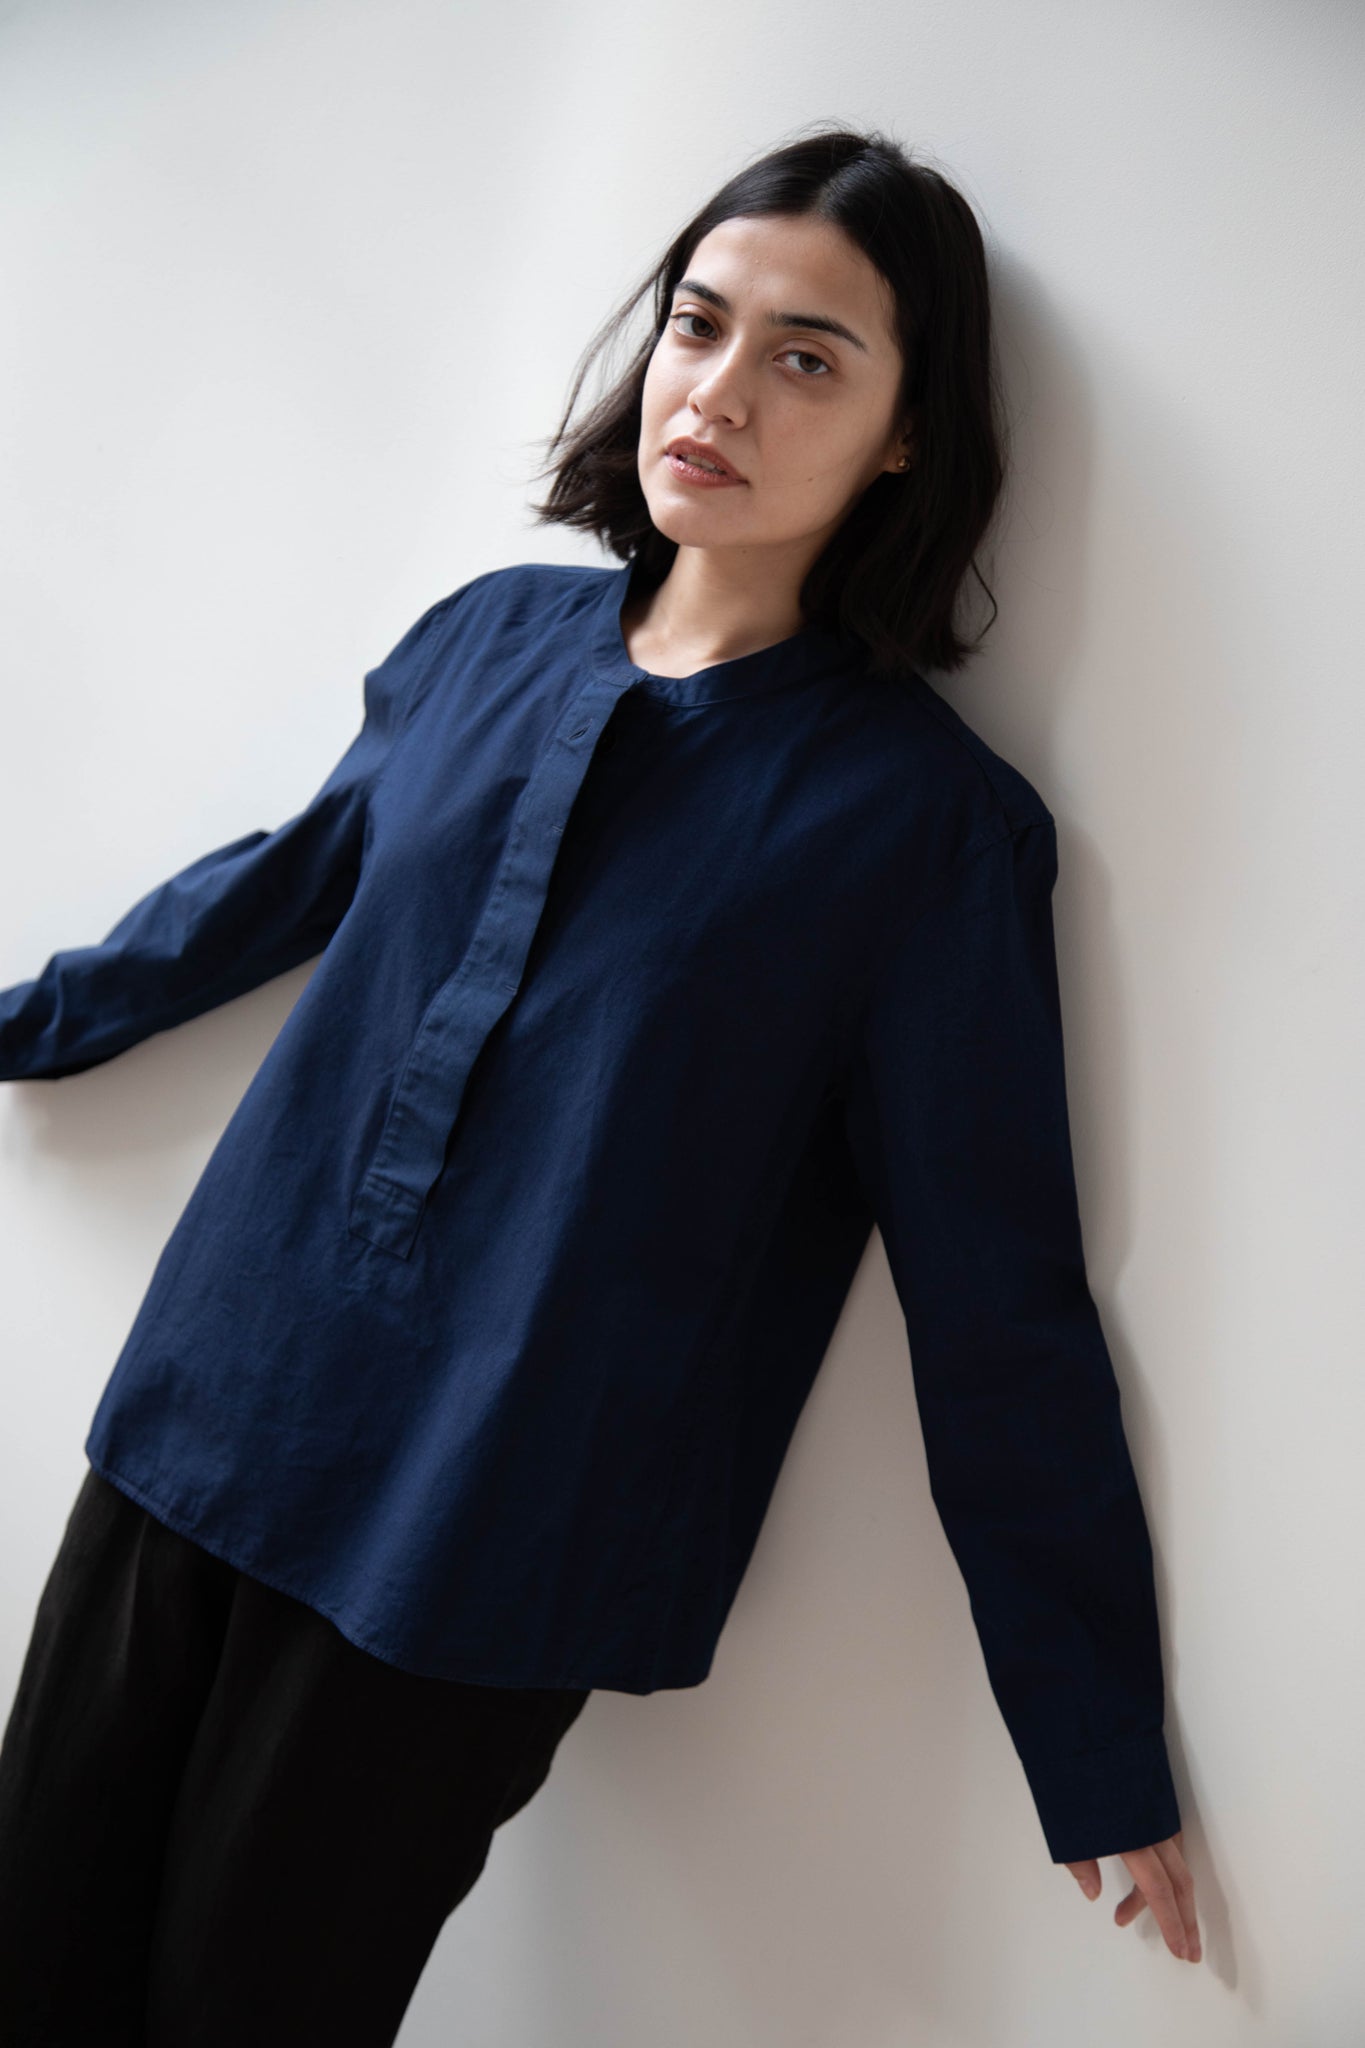 MHL | Fly Placket Swing Top in Indigo